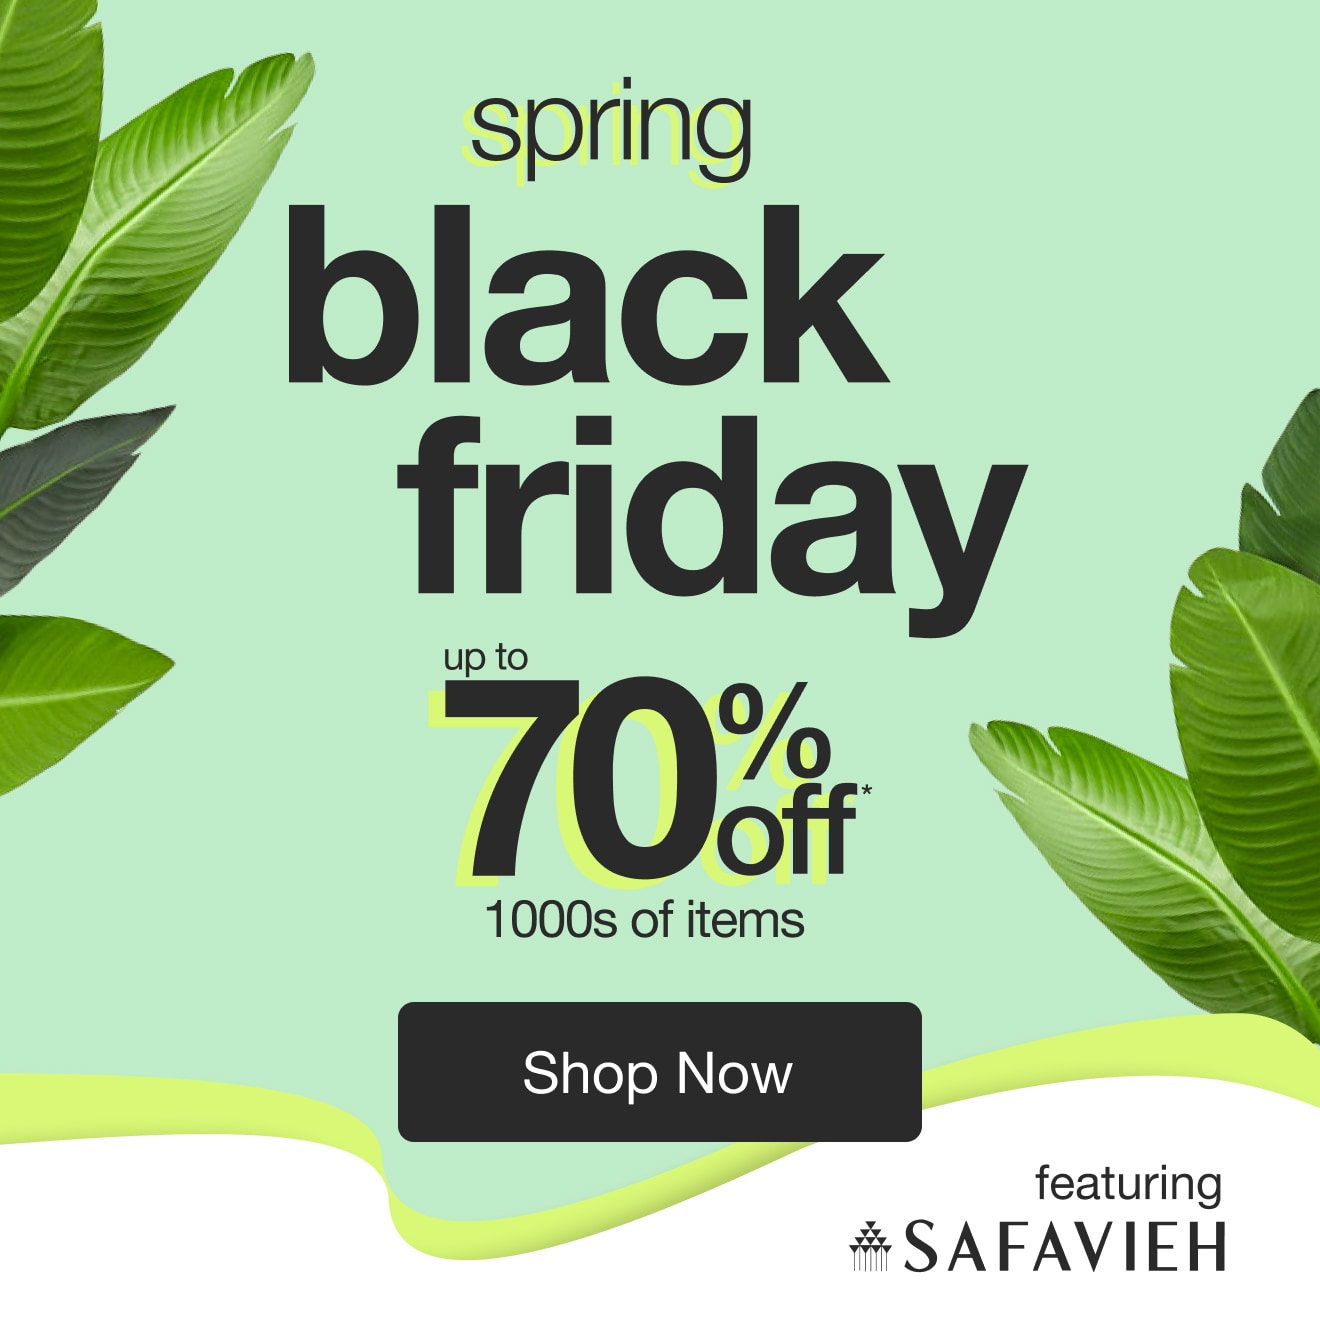 Spring Black Friday Up to 70% Off 1000s of Items*